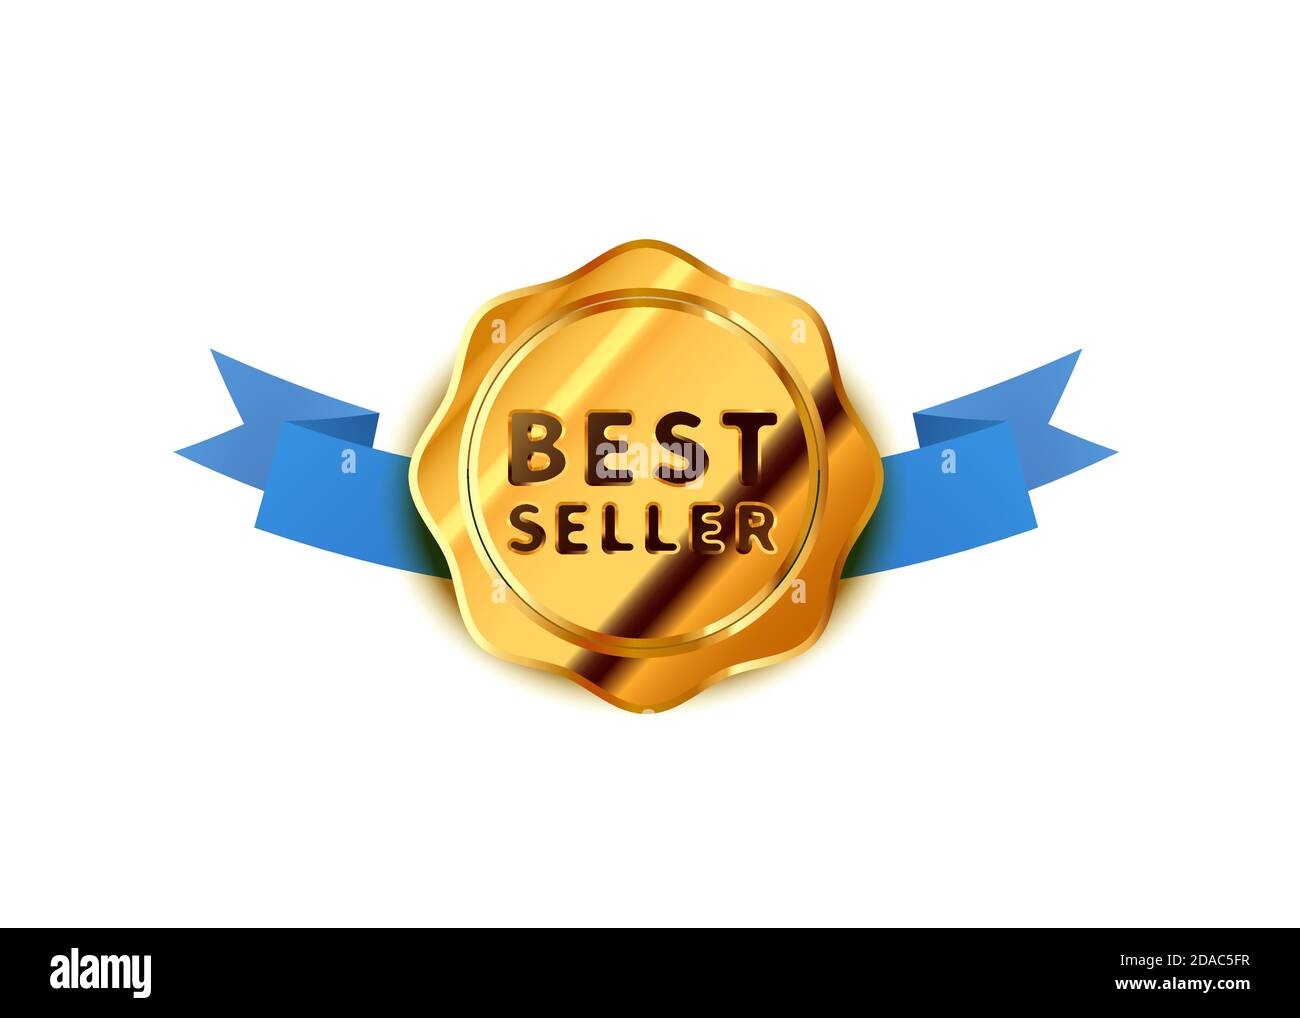 4,200+ Best Seller Badge Stock Photos, Pictures & Royalty-Free